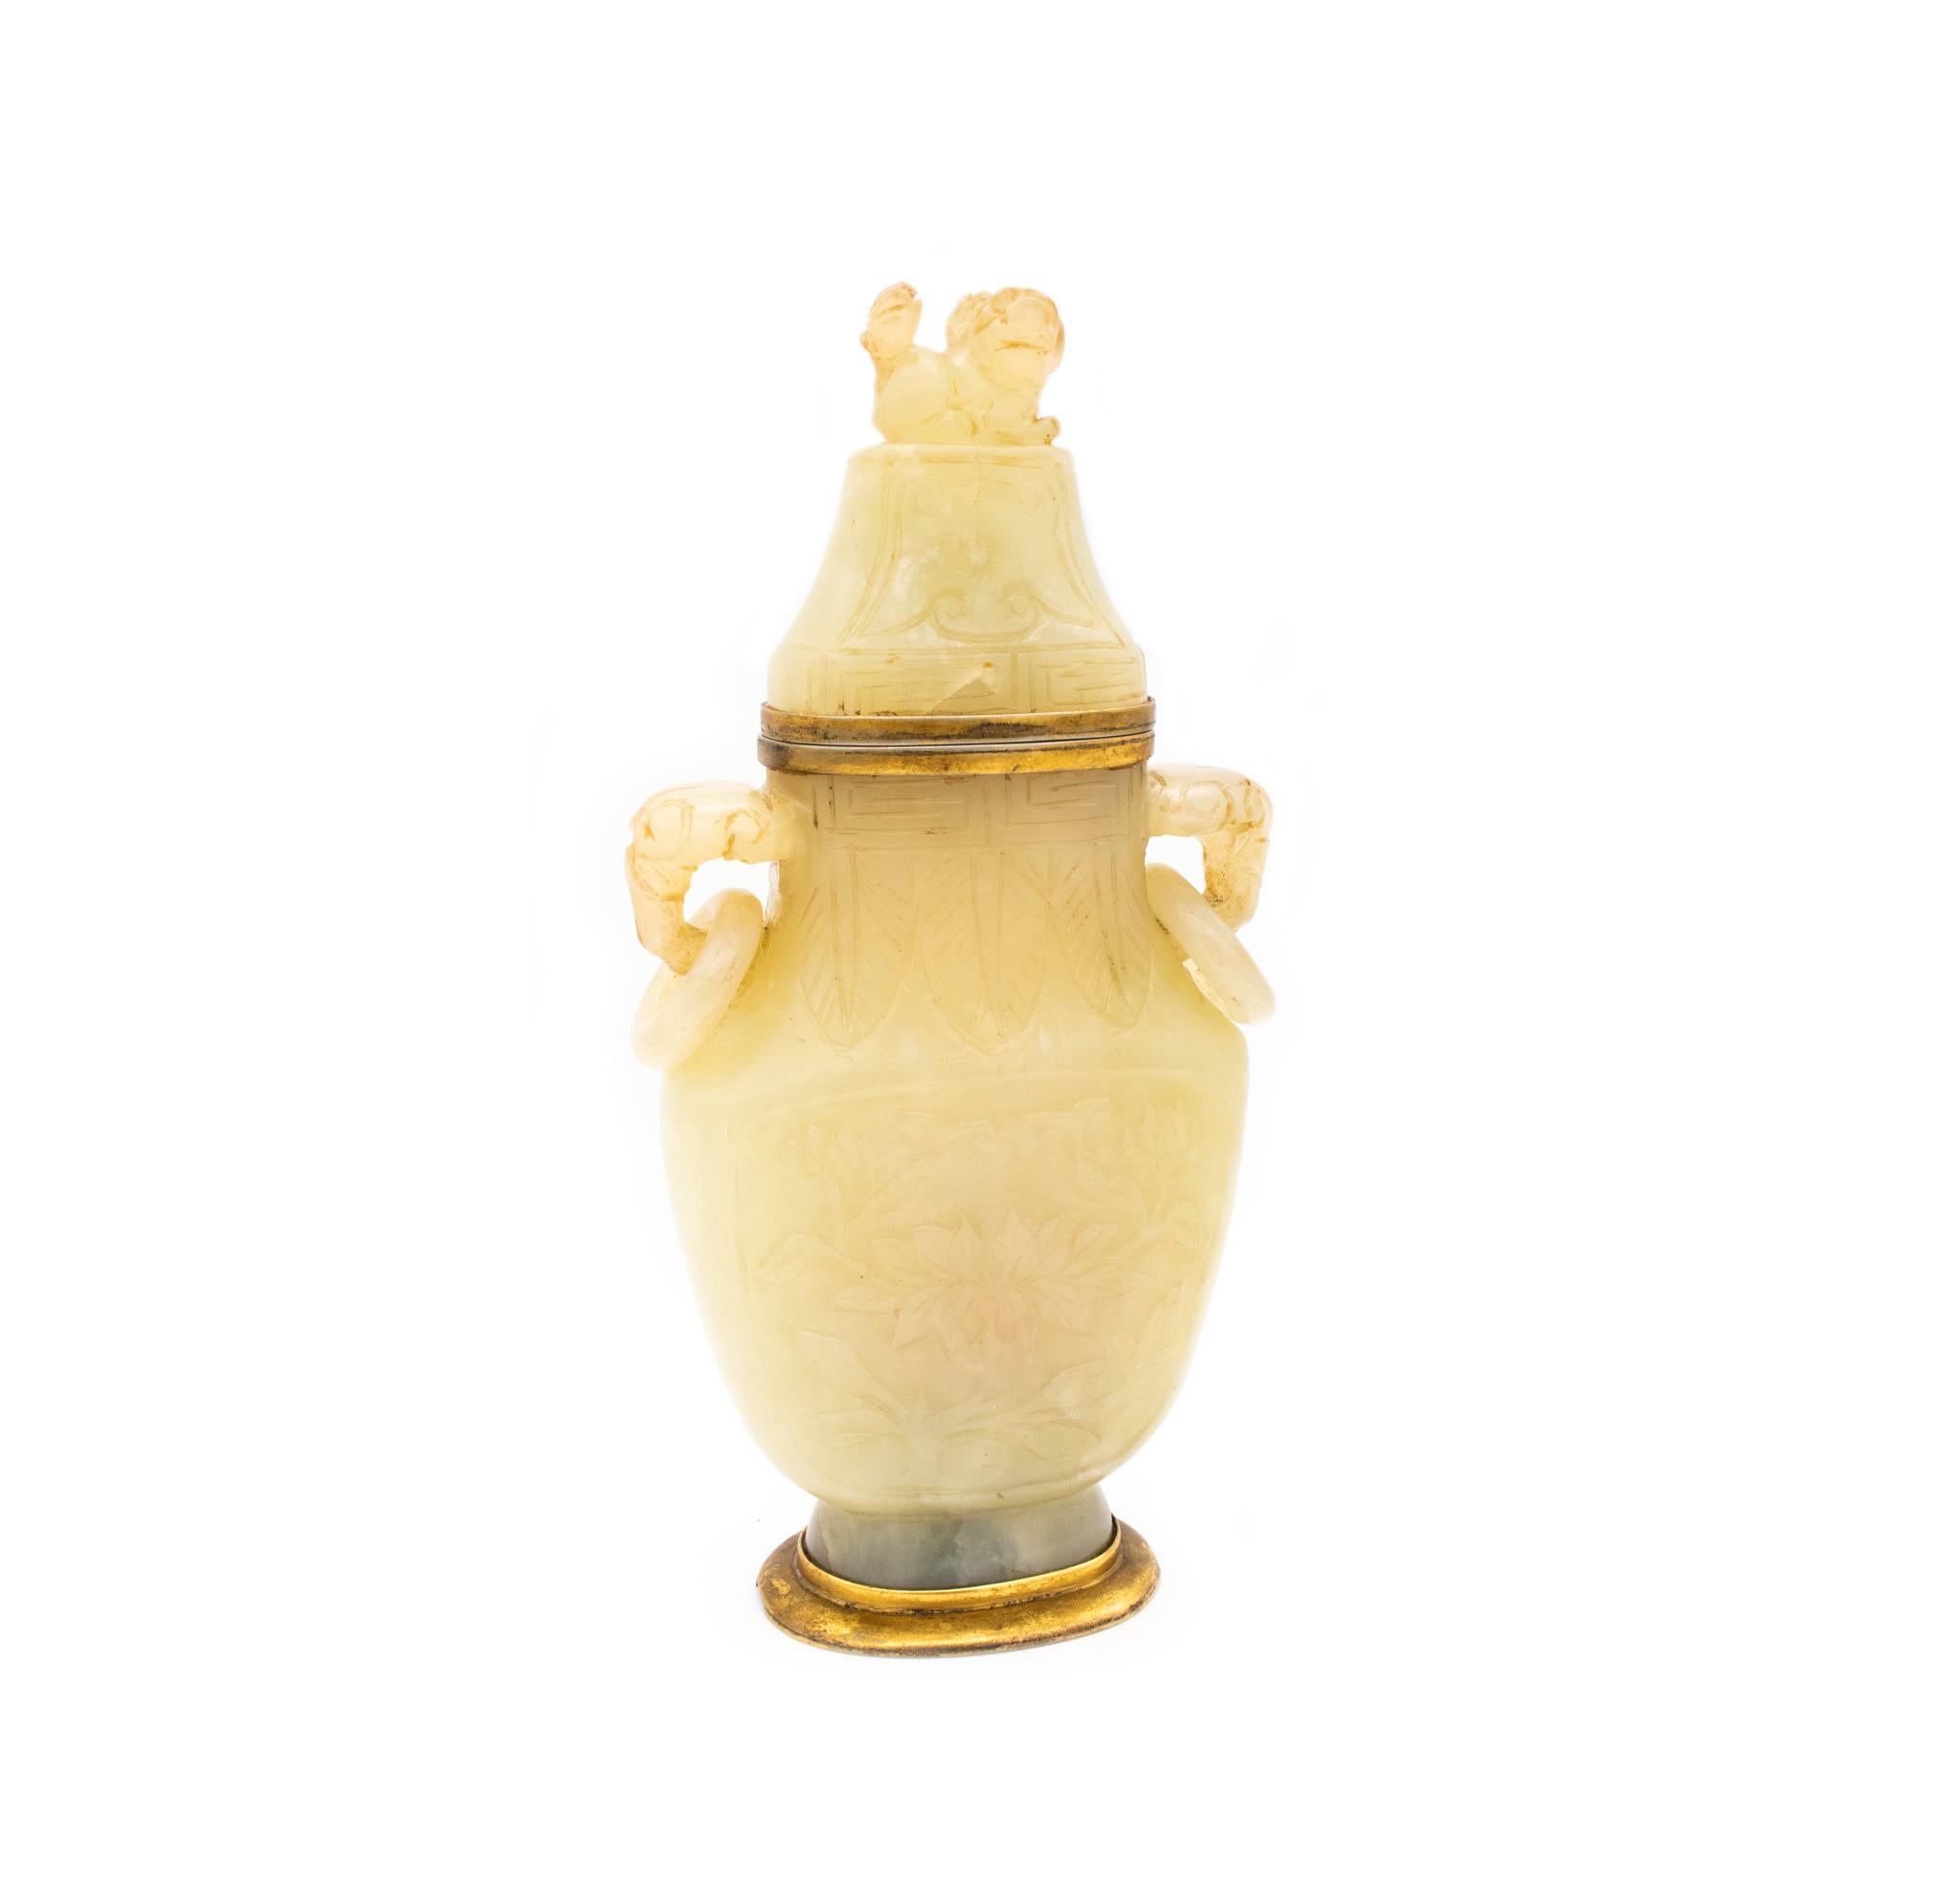 Perfume scent urn vase carved from nephrite jade Qing Dynasty (1644-1911).

An exceptional antique urn for perfumed scents from the 19th century. The carvings are from the Chinese, Qing dynasty (1644-1911) period, made circa 1800's. They are